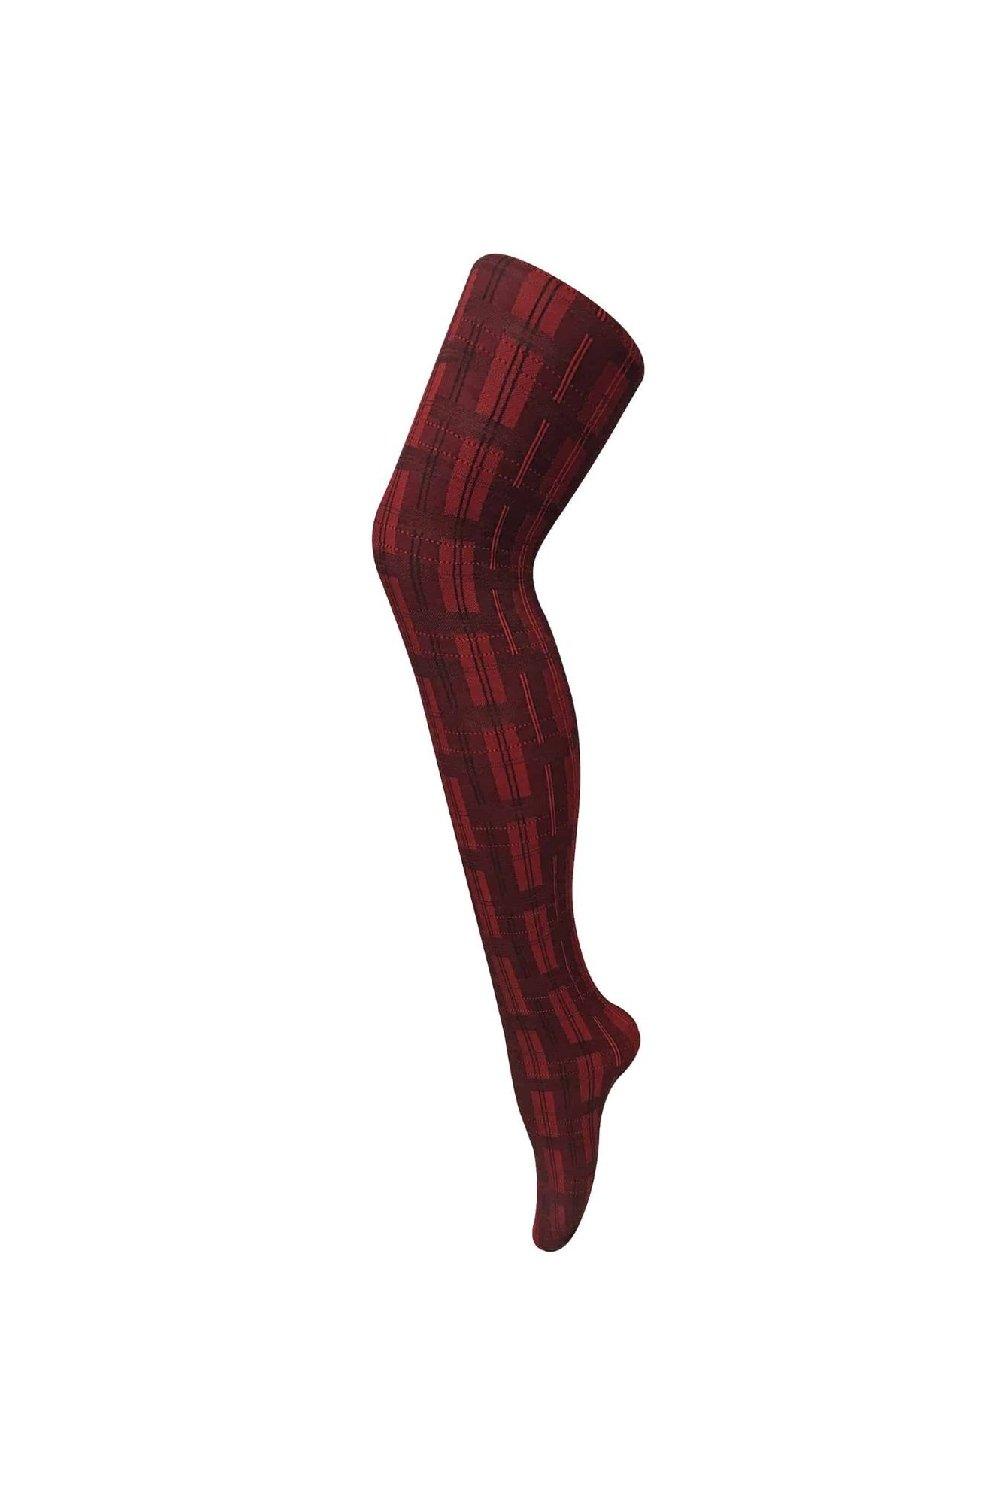 80 Denier Colourful Opaque Patterned Fashion Tights - Skye